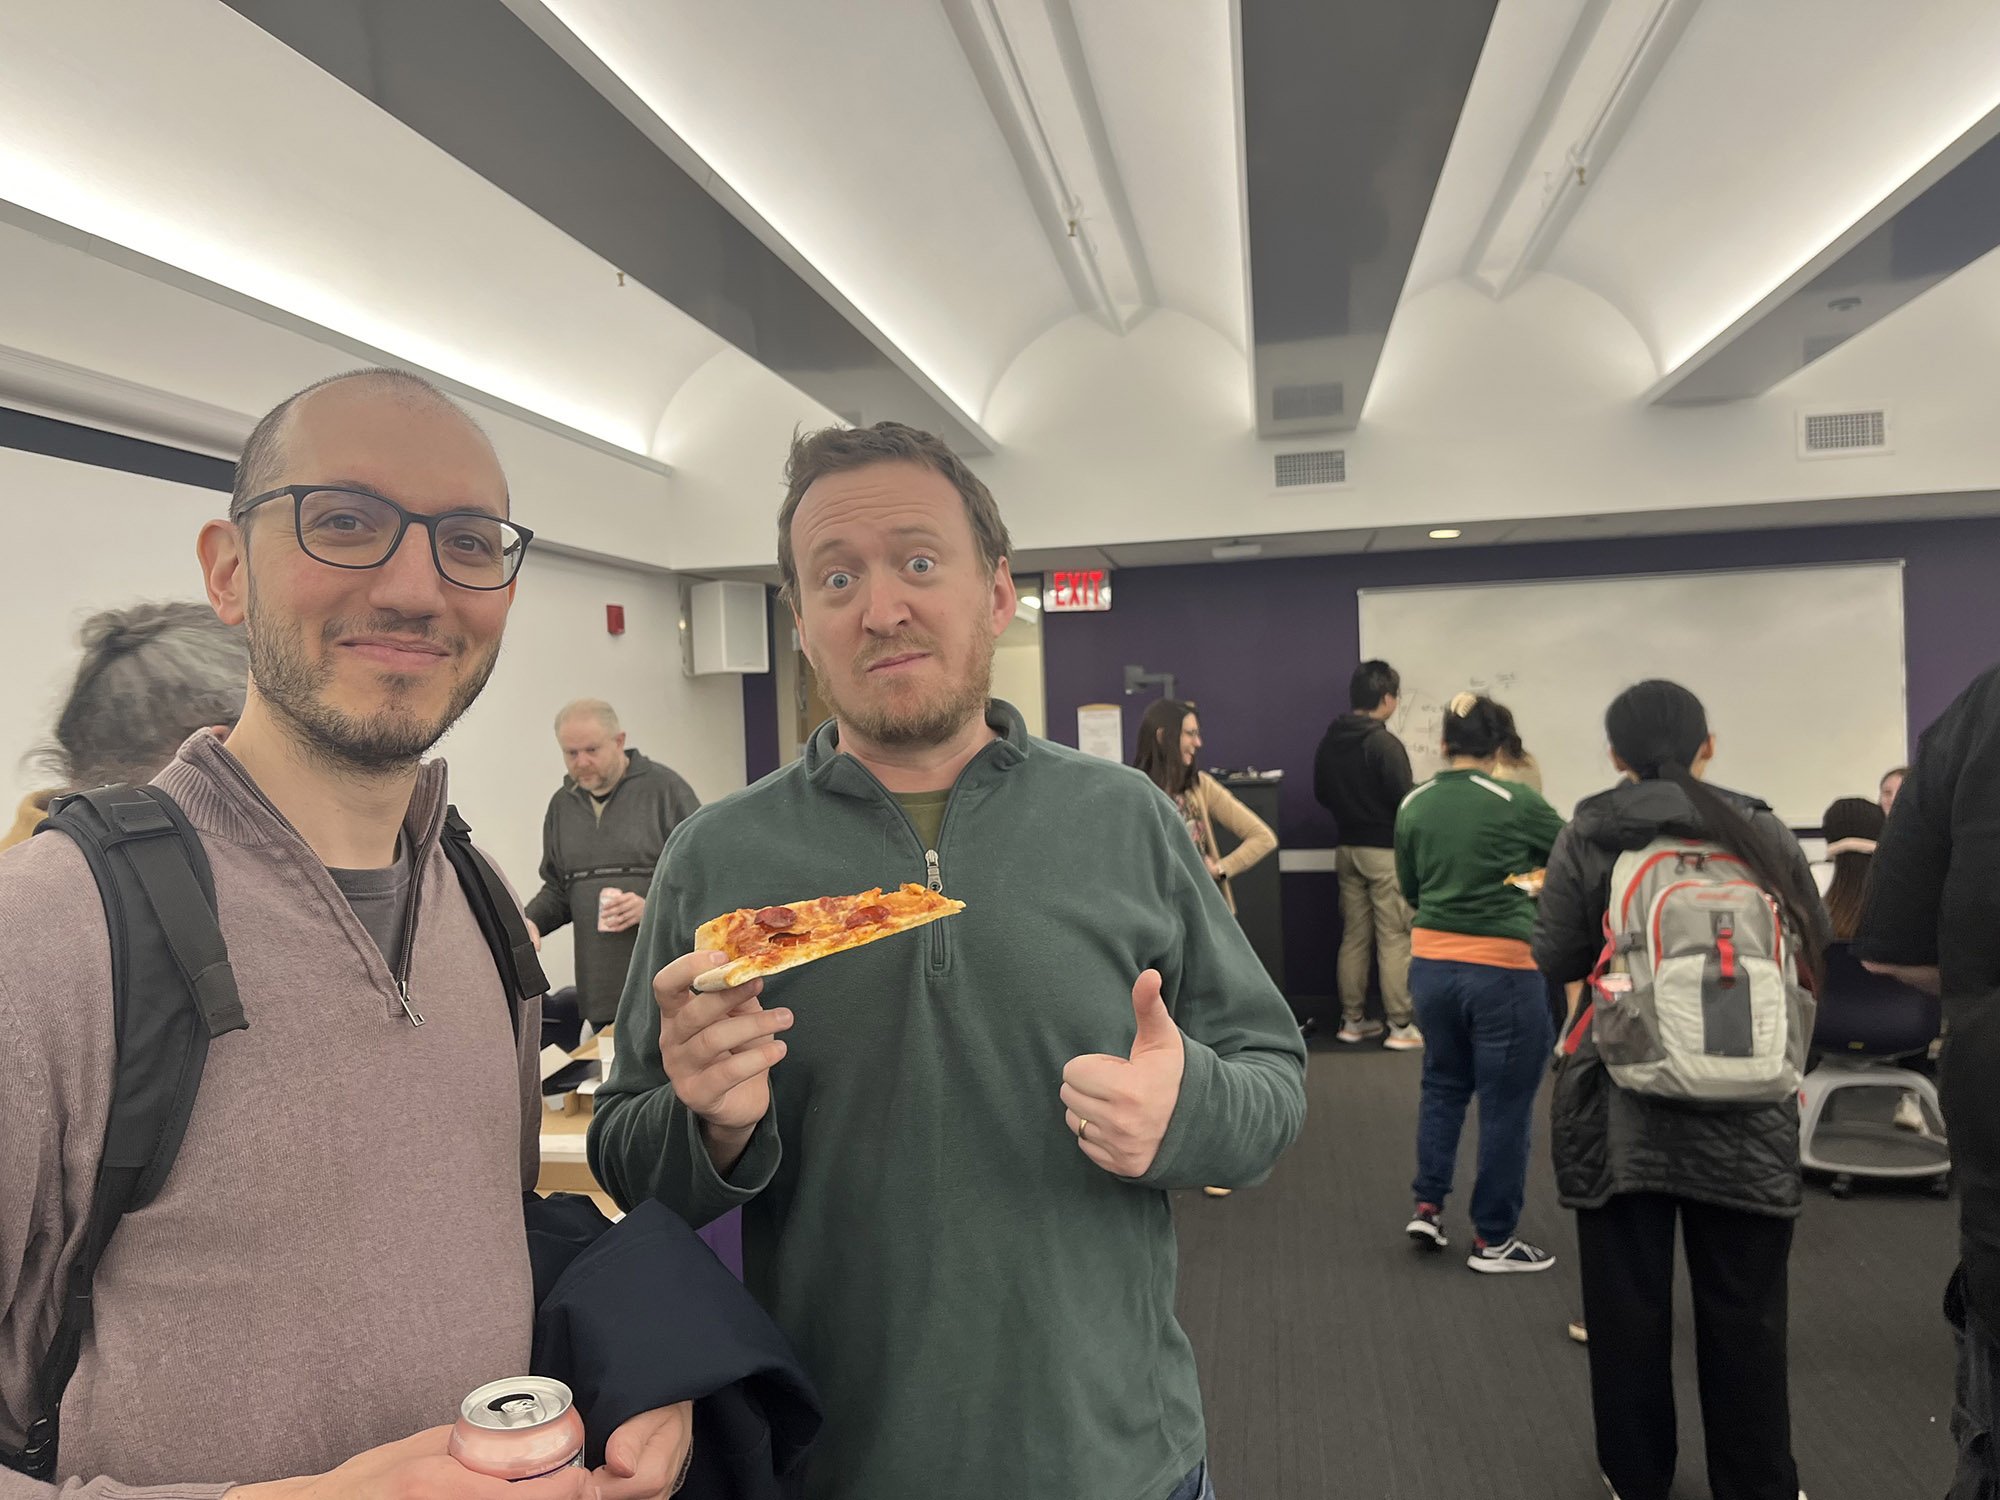 Faculty and staff from UAlbany's Department of Mathematics and Statstics celebrates Pi Day on March 14 with pizza.